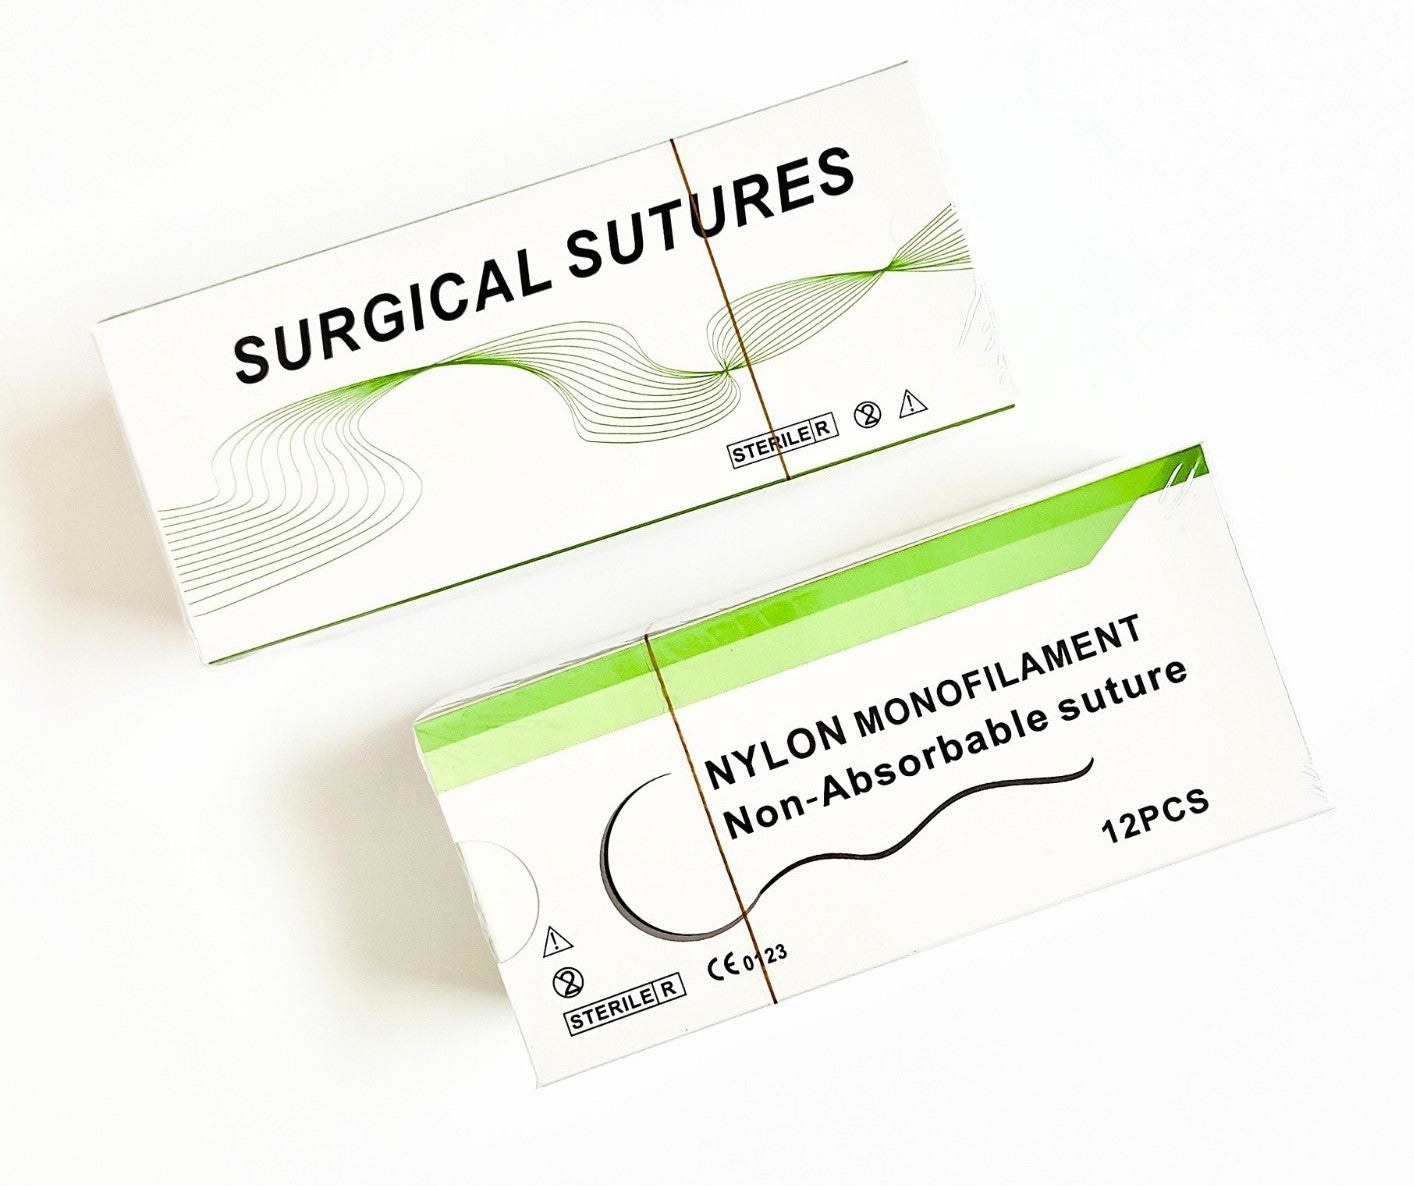 Surgical Sutures Nylon Monofilament Non-Absorbable Suture (5+2 For Free)